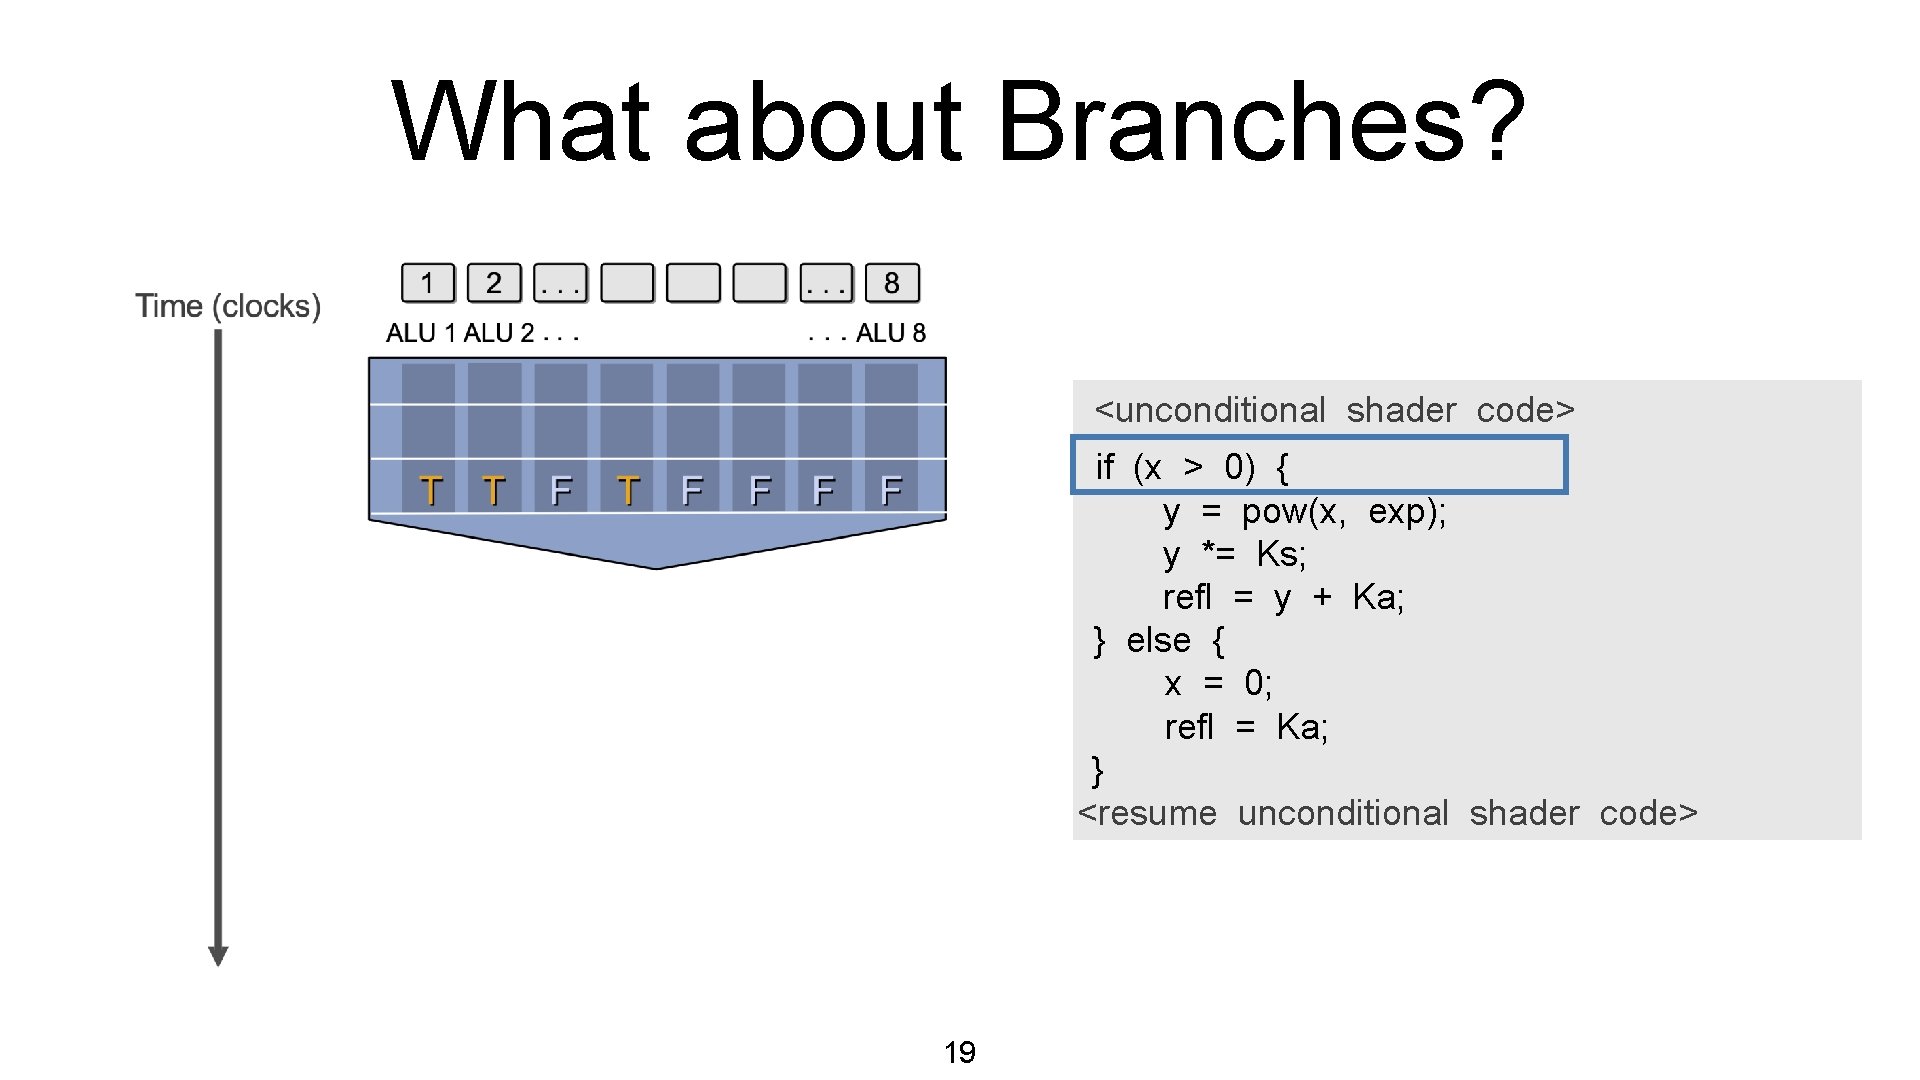 What about Branches? <unconditional shader code> if (x > 0) { y = pow(x,